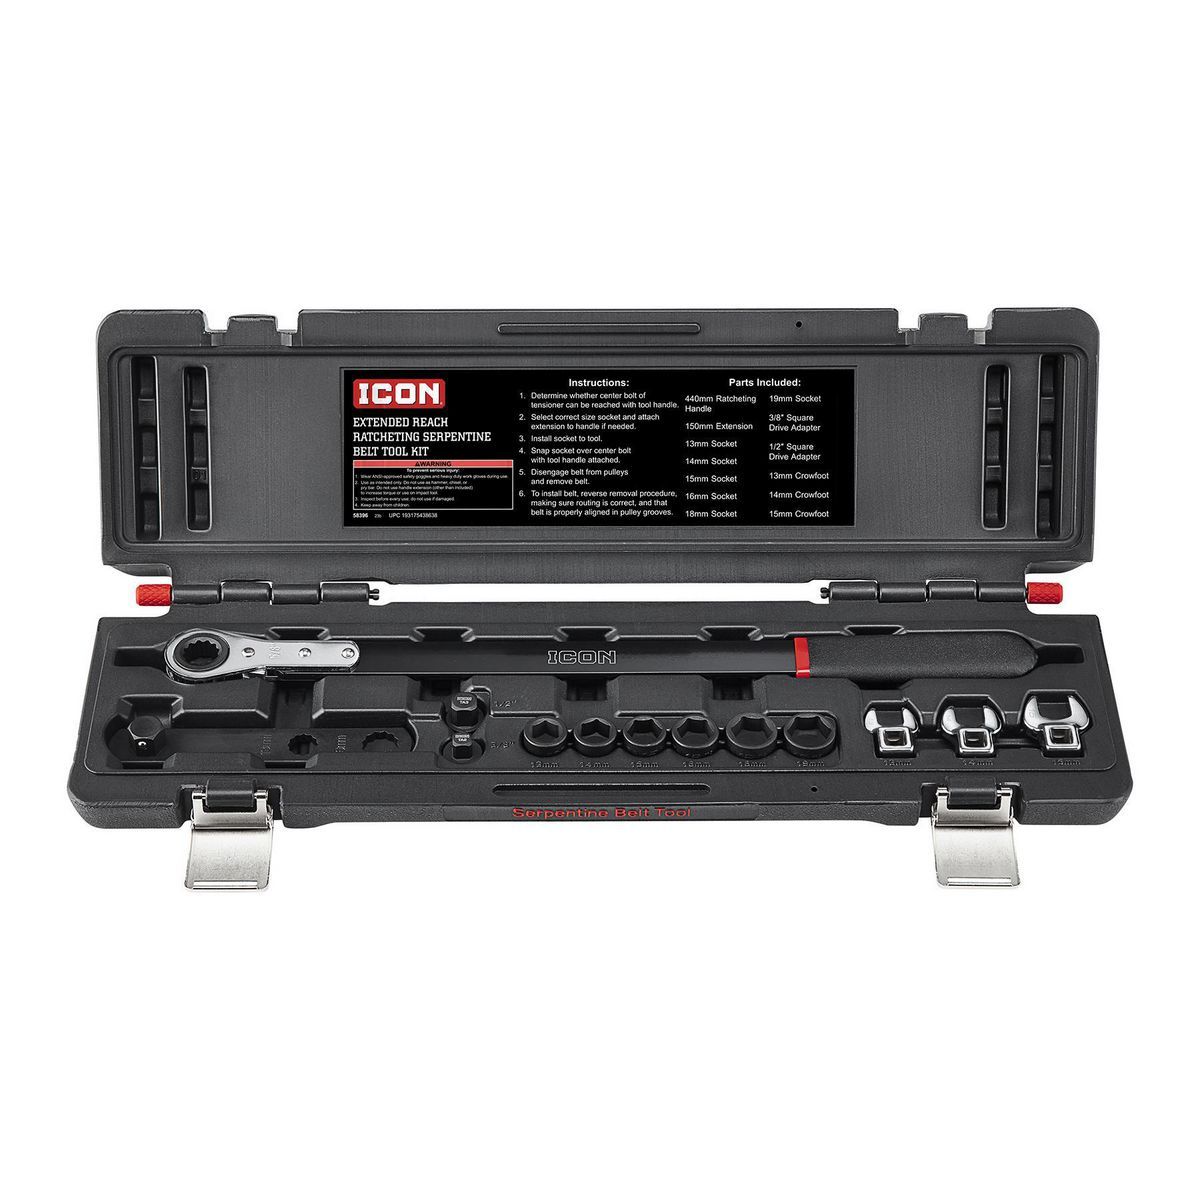 Extended-Reach Ratcheting Serpentine Belt Tool Kit